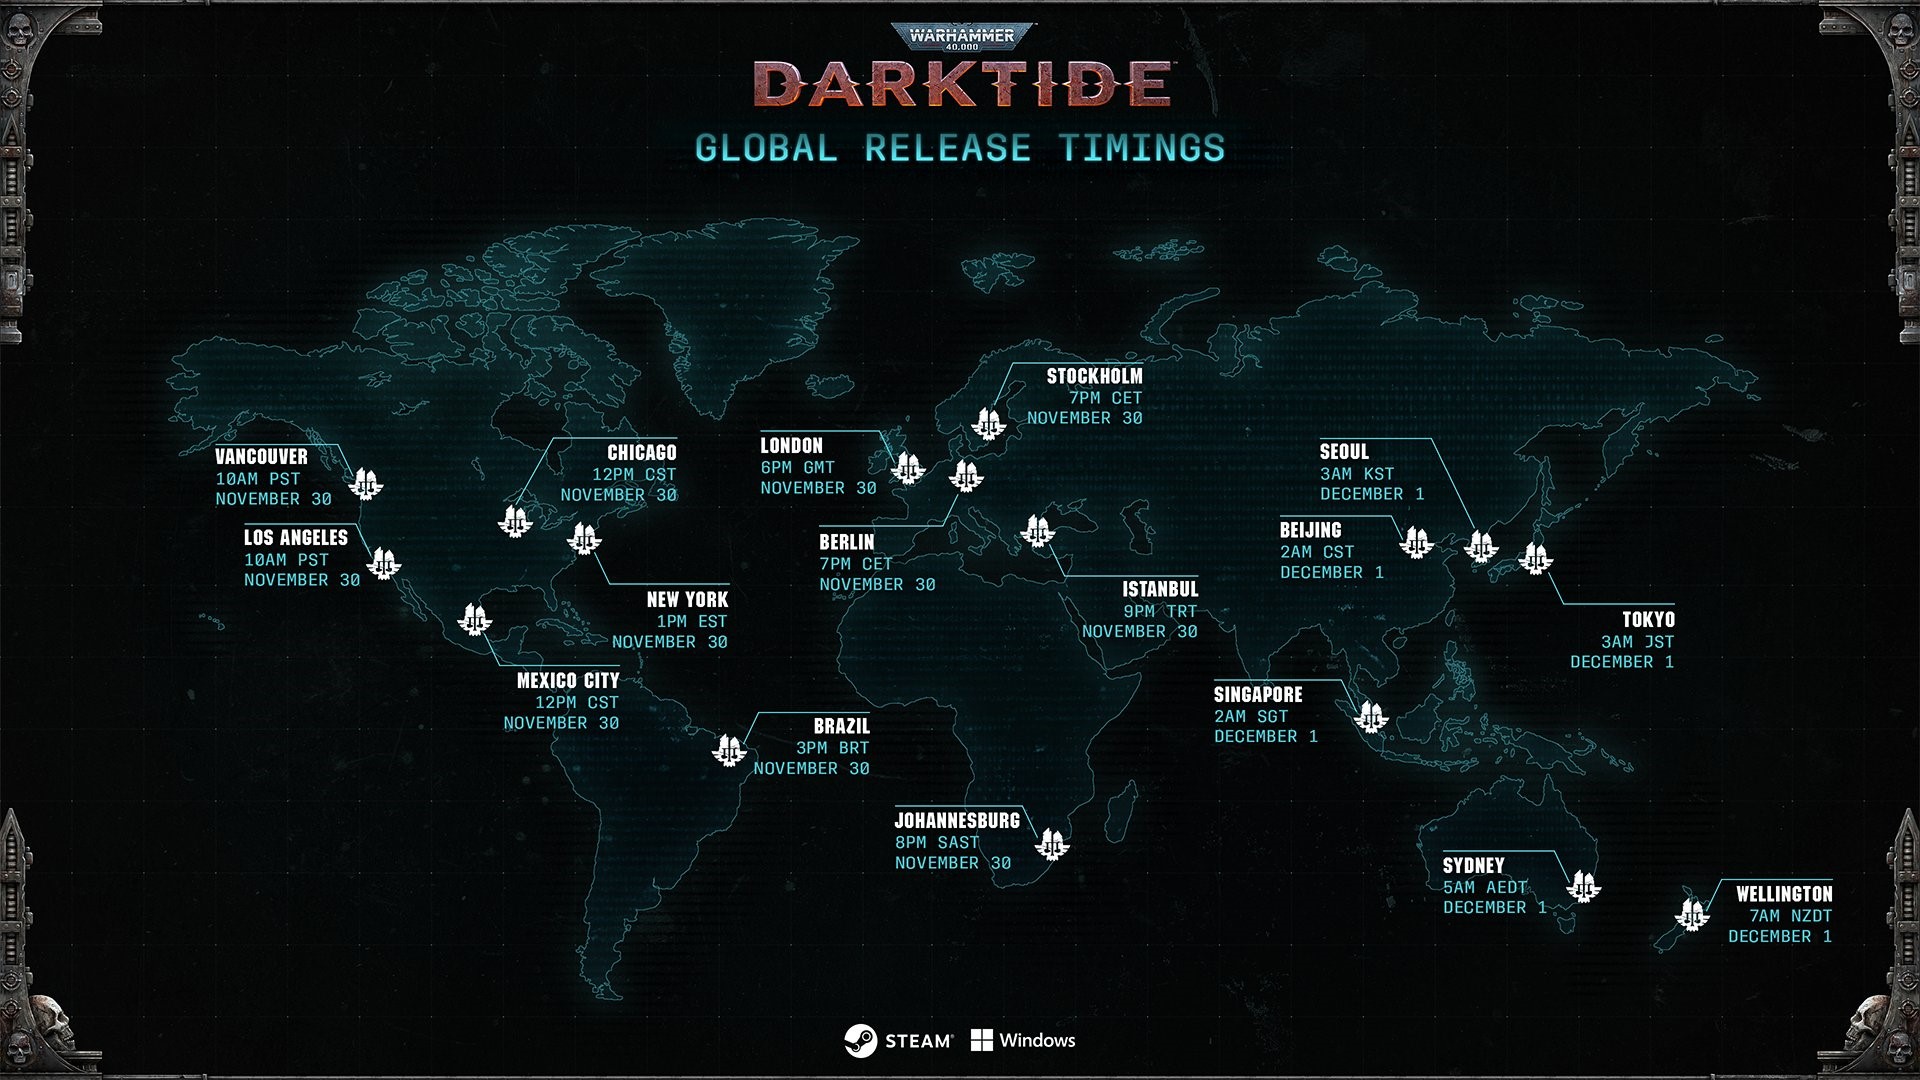 Darktide release times map with all regions